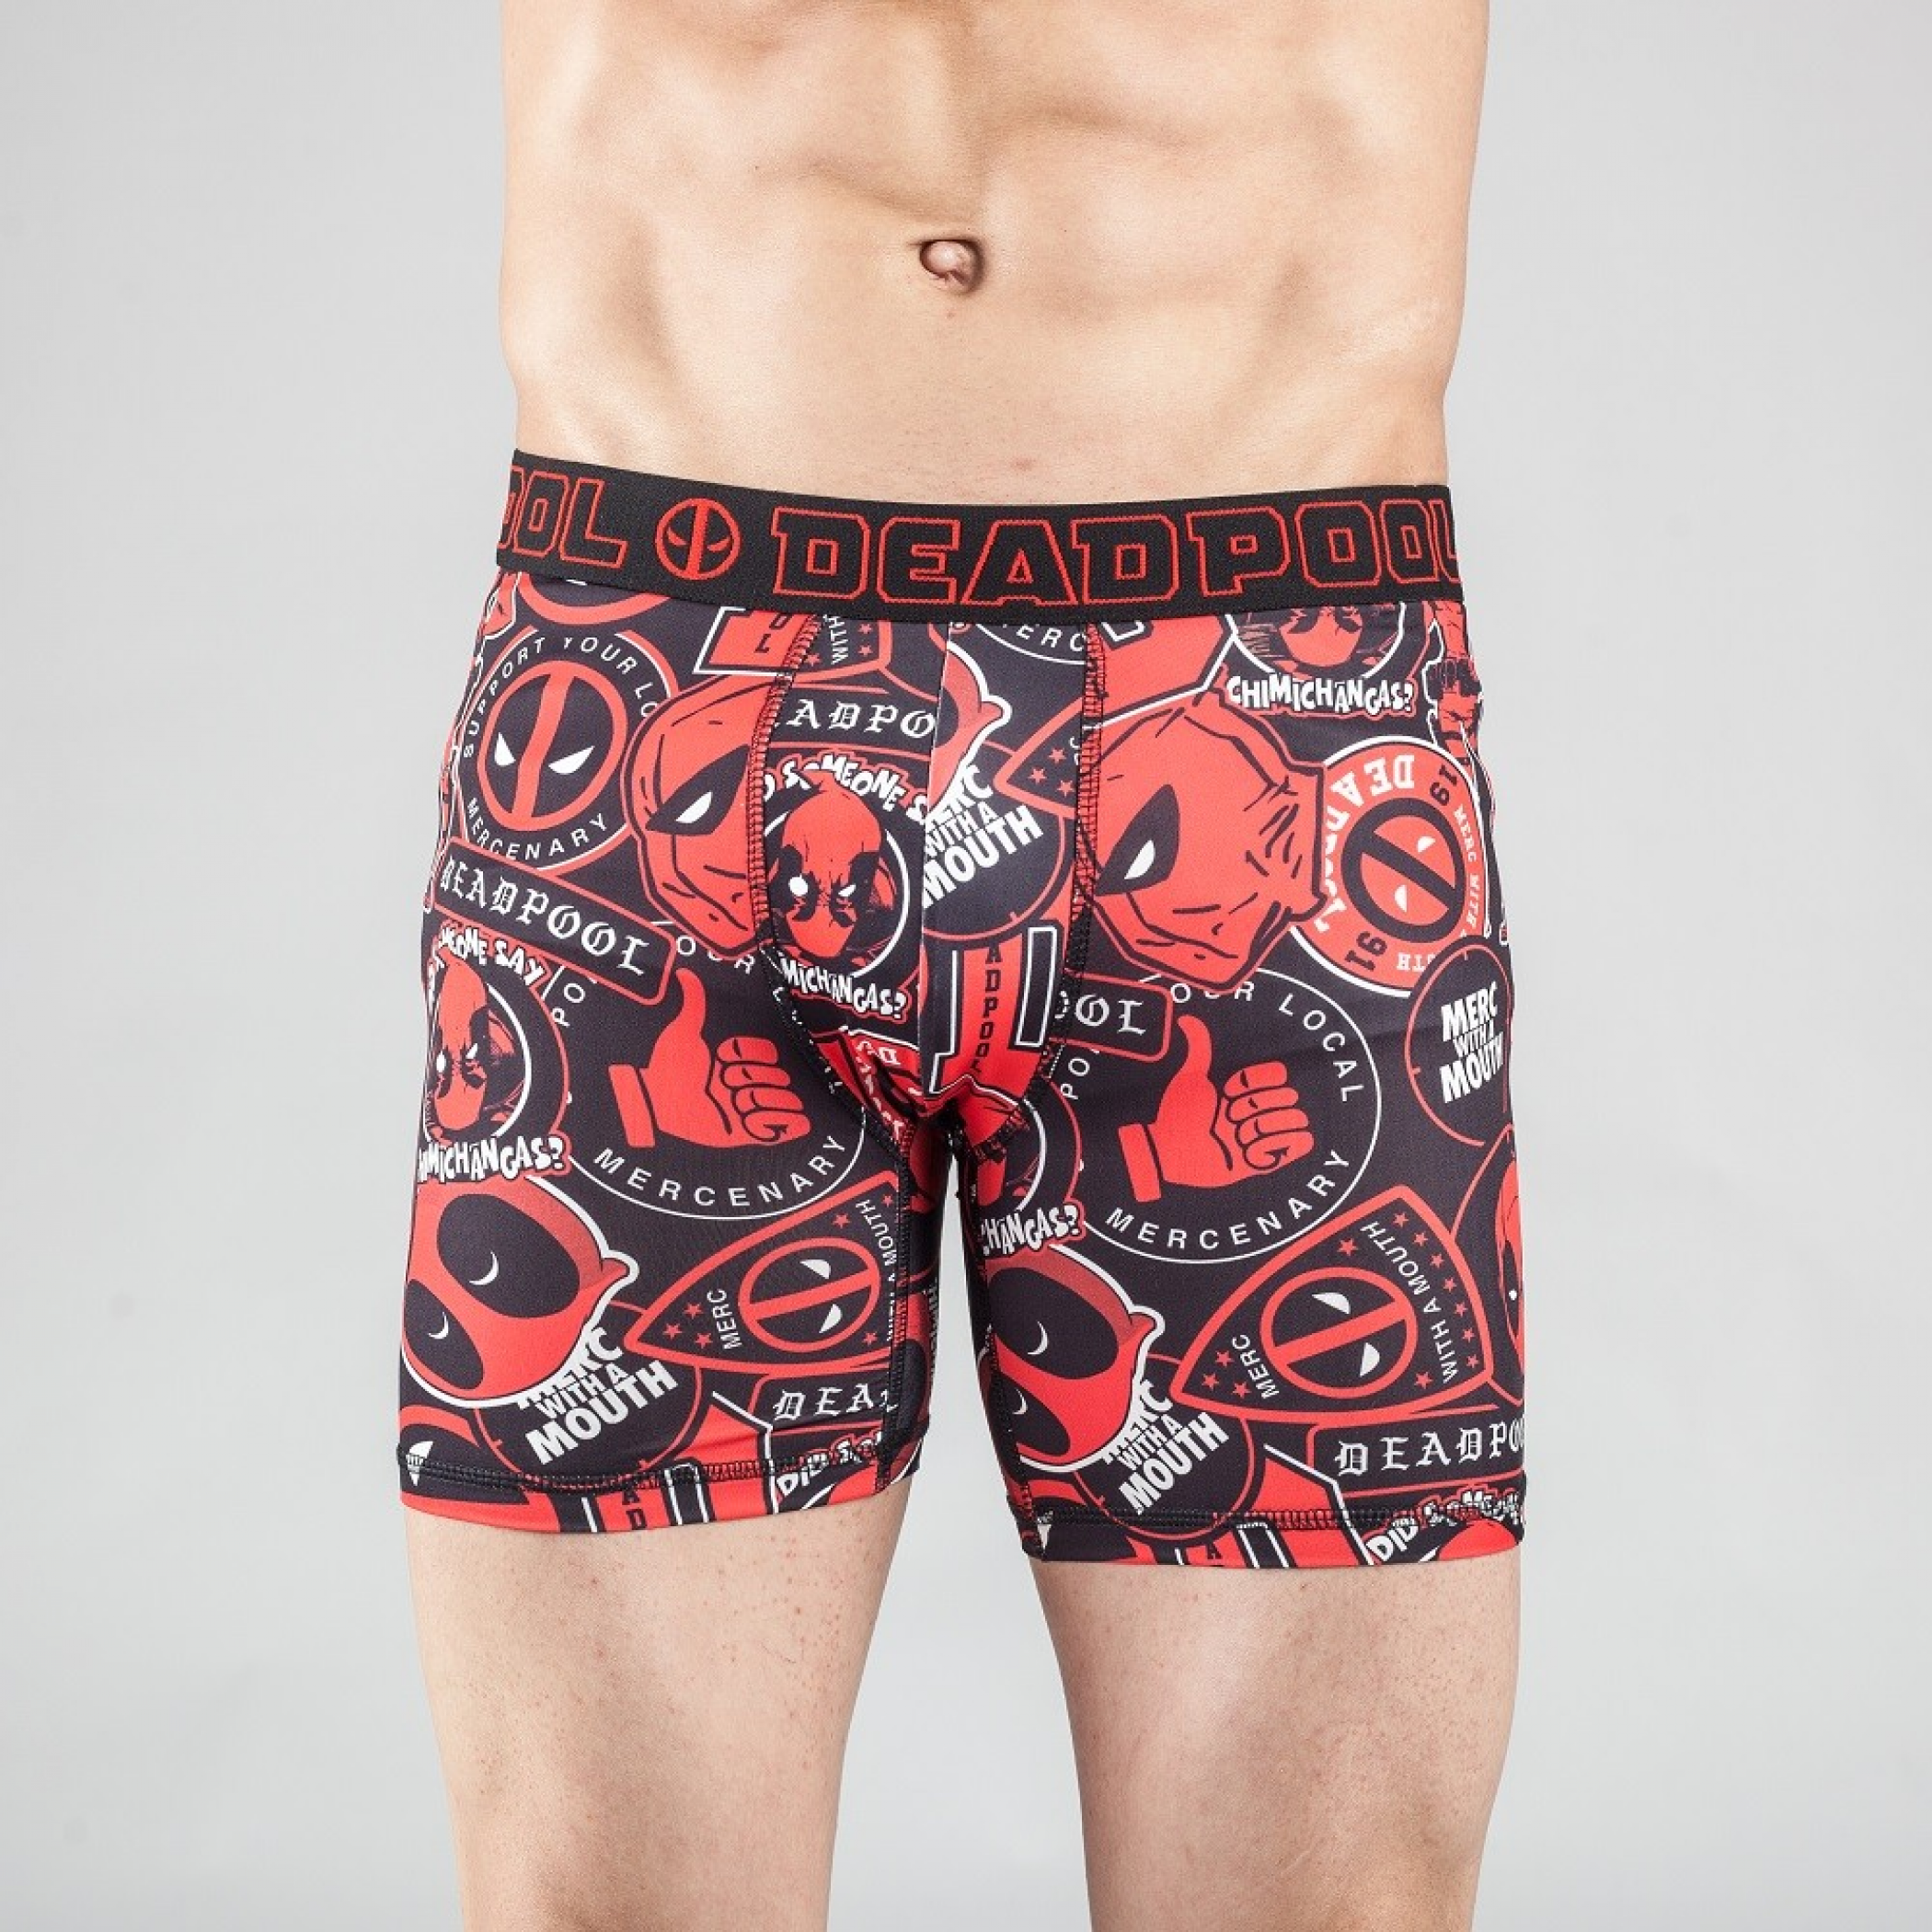 Deadpool Character and Symbols All Over Men's Underwear Boxer Briefs